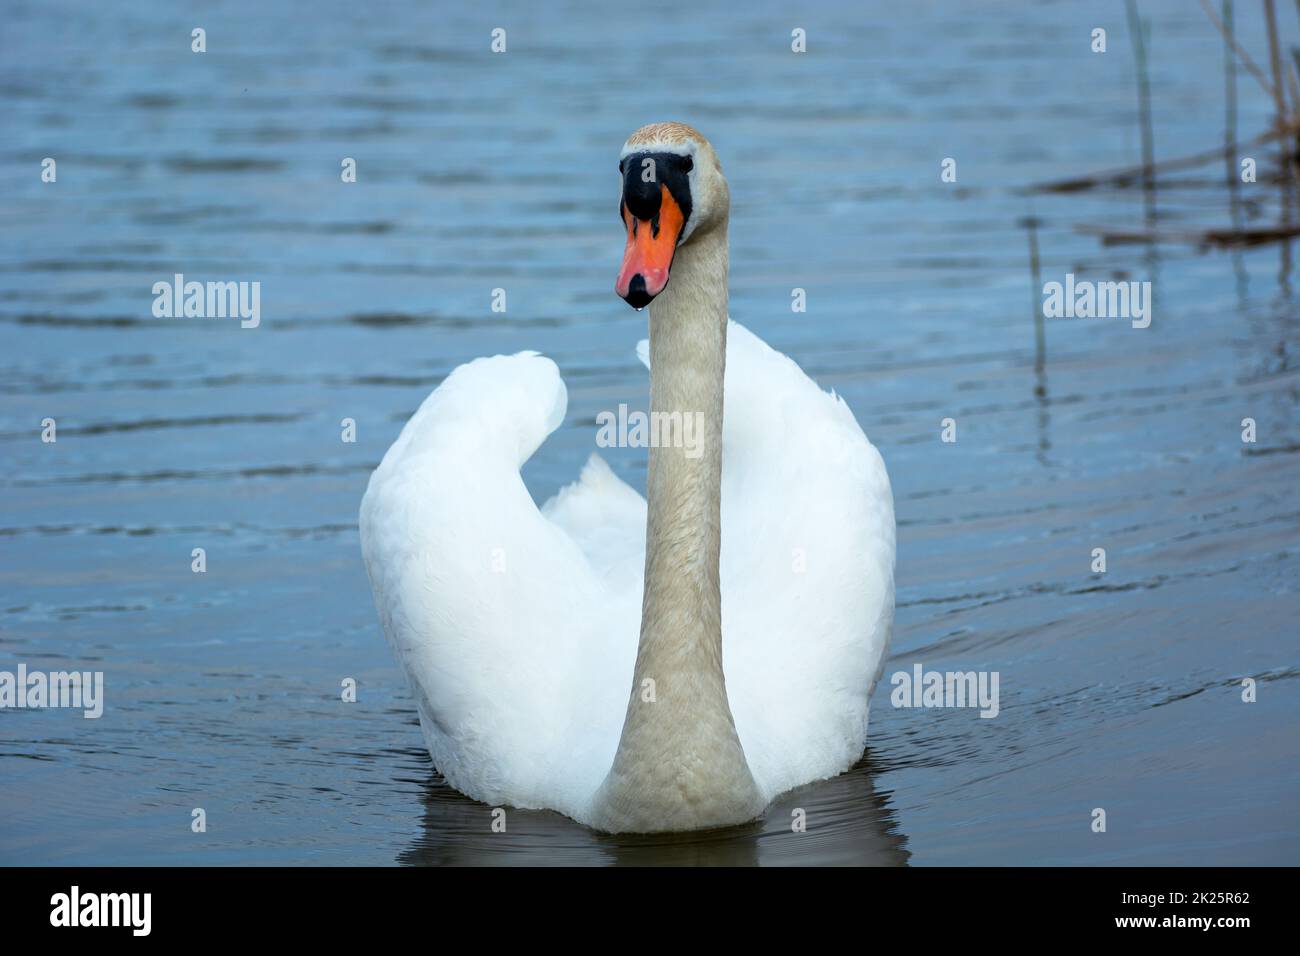 A single mute swan swimming in the lake Stock Photo